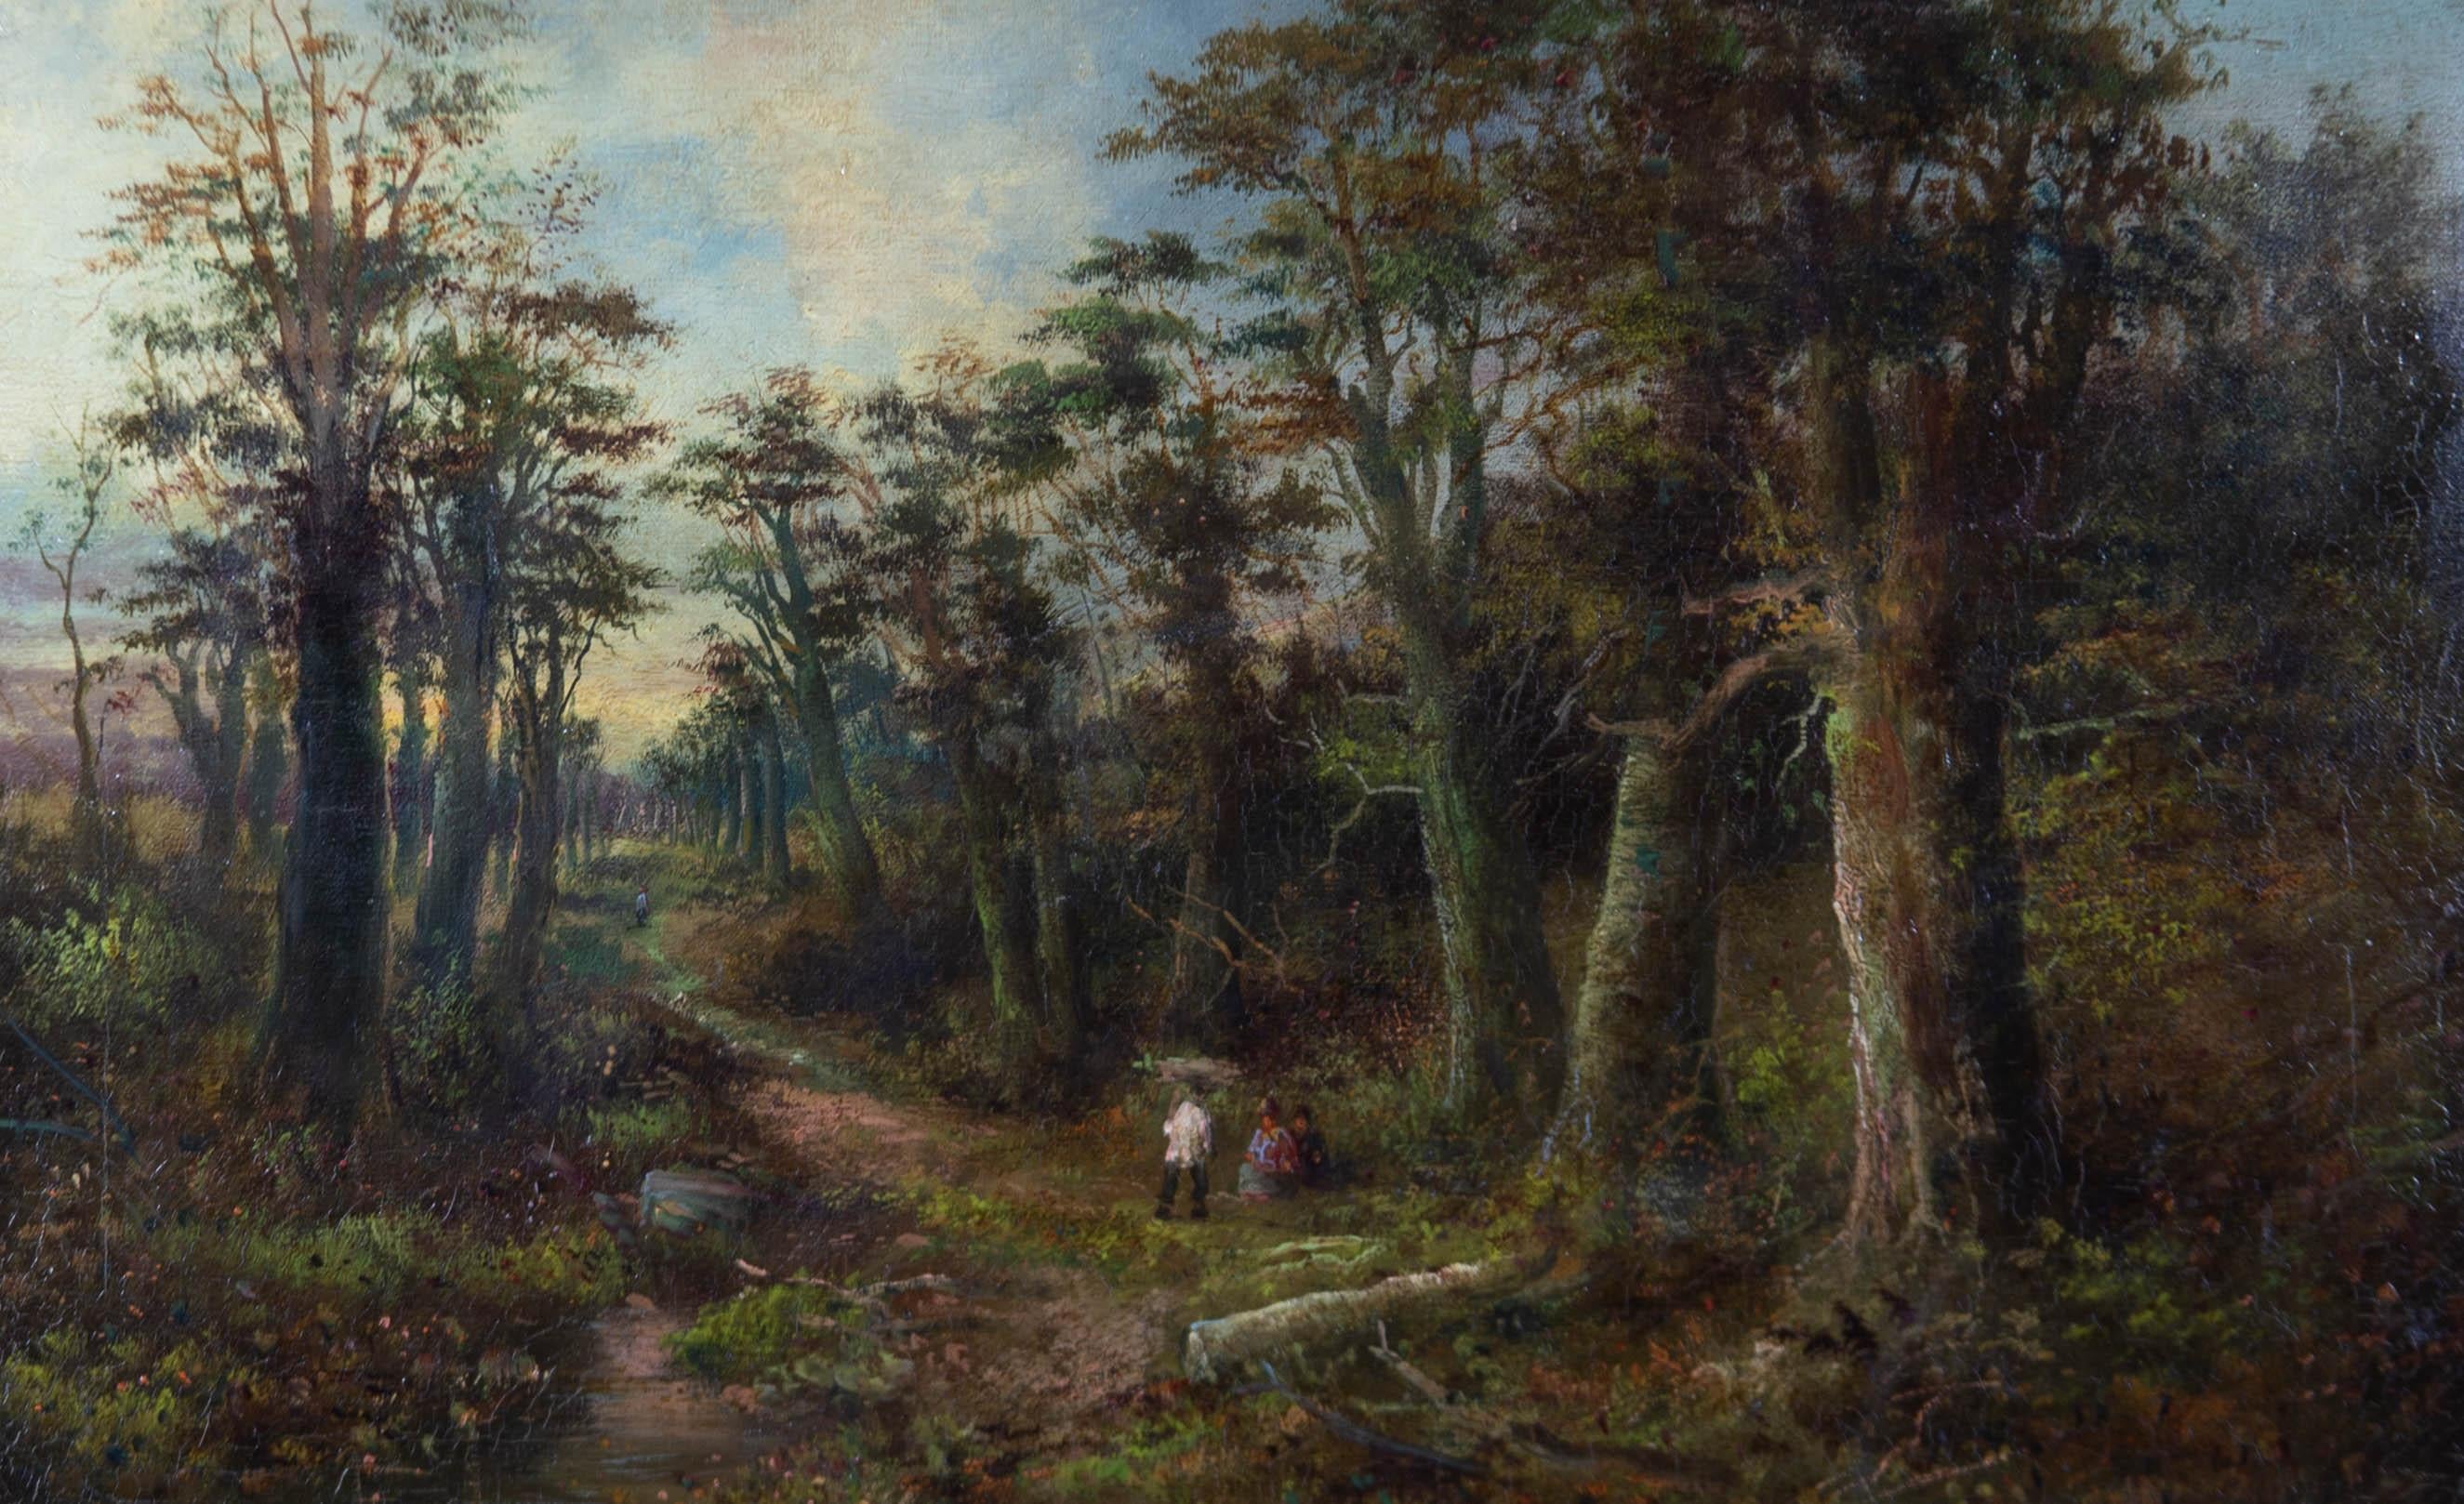 A rustic oil woodland scene showing a long avenue of trees that winds far into the distance. The land around and path between the trees is full of shrubs and undergrowth. Several figures can be seen at different points along the path. The artist has